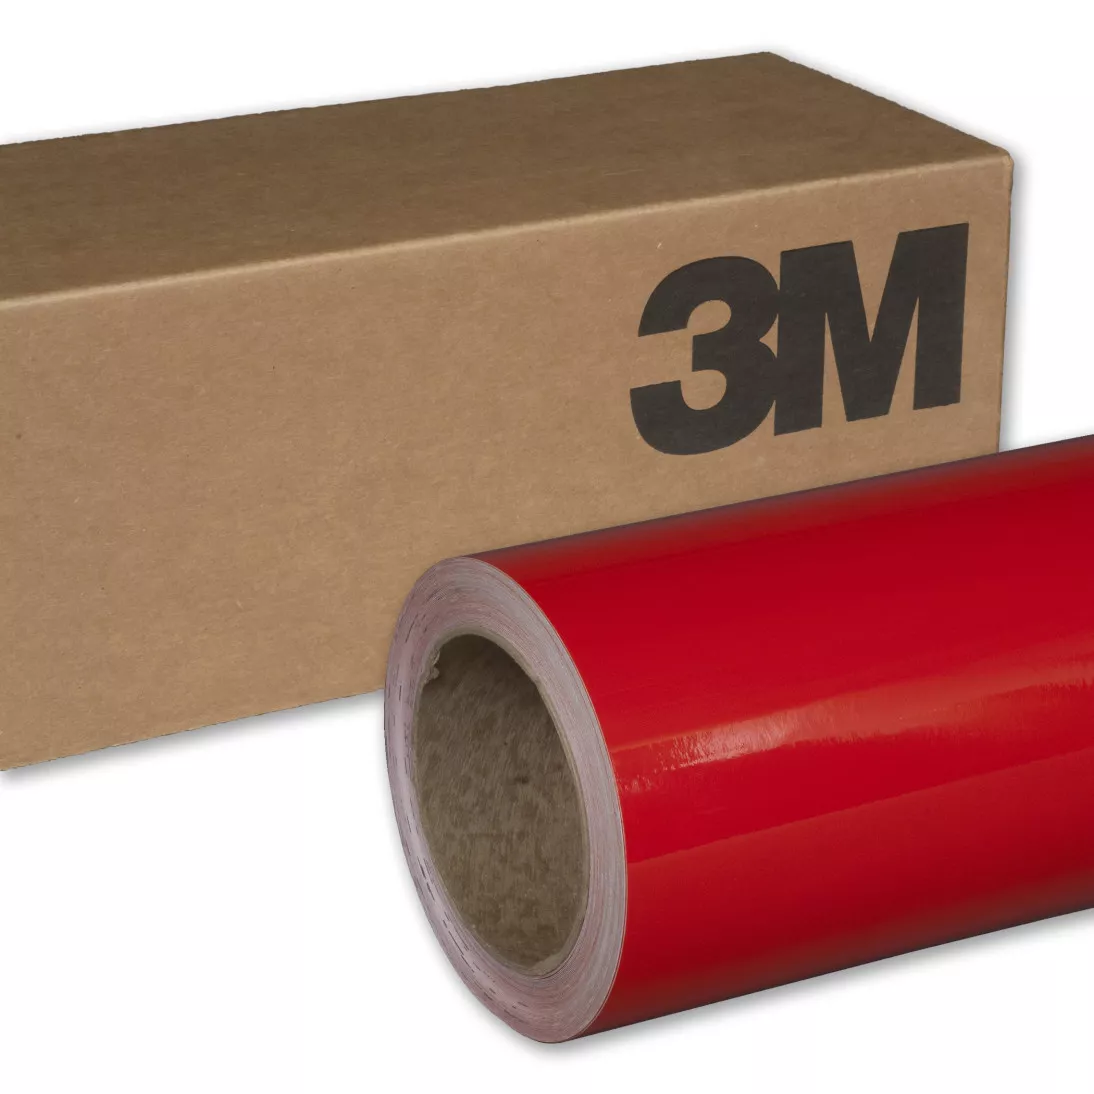 3M™ Wrap Film 2080-G13, Gloss Hot Rod Red, 60 in x 25 yd